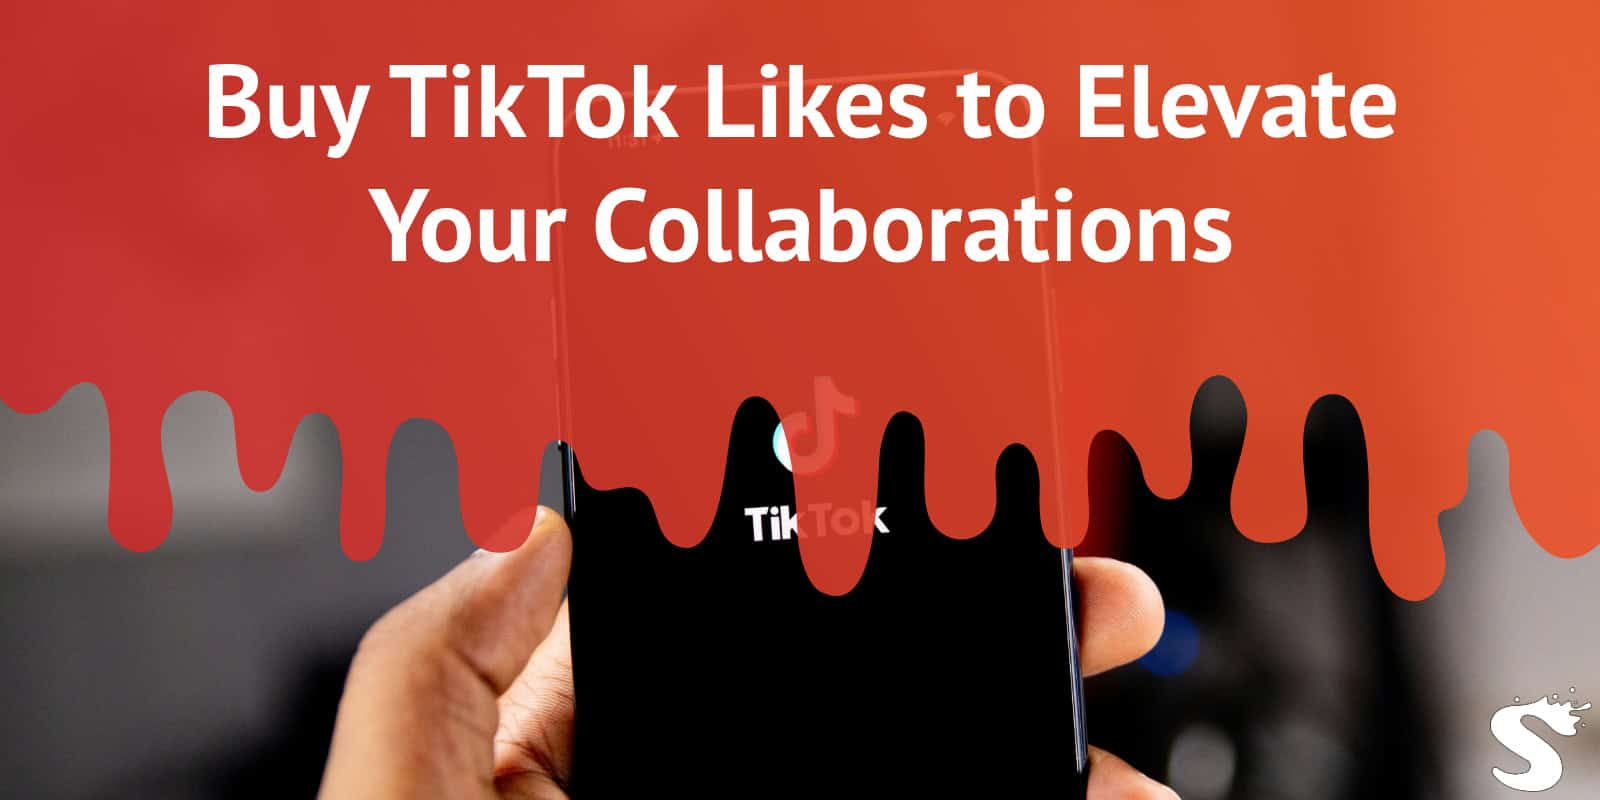 Buy TikTok Likes to Elevate Your Collaborations